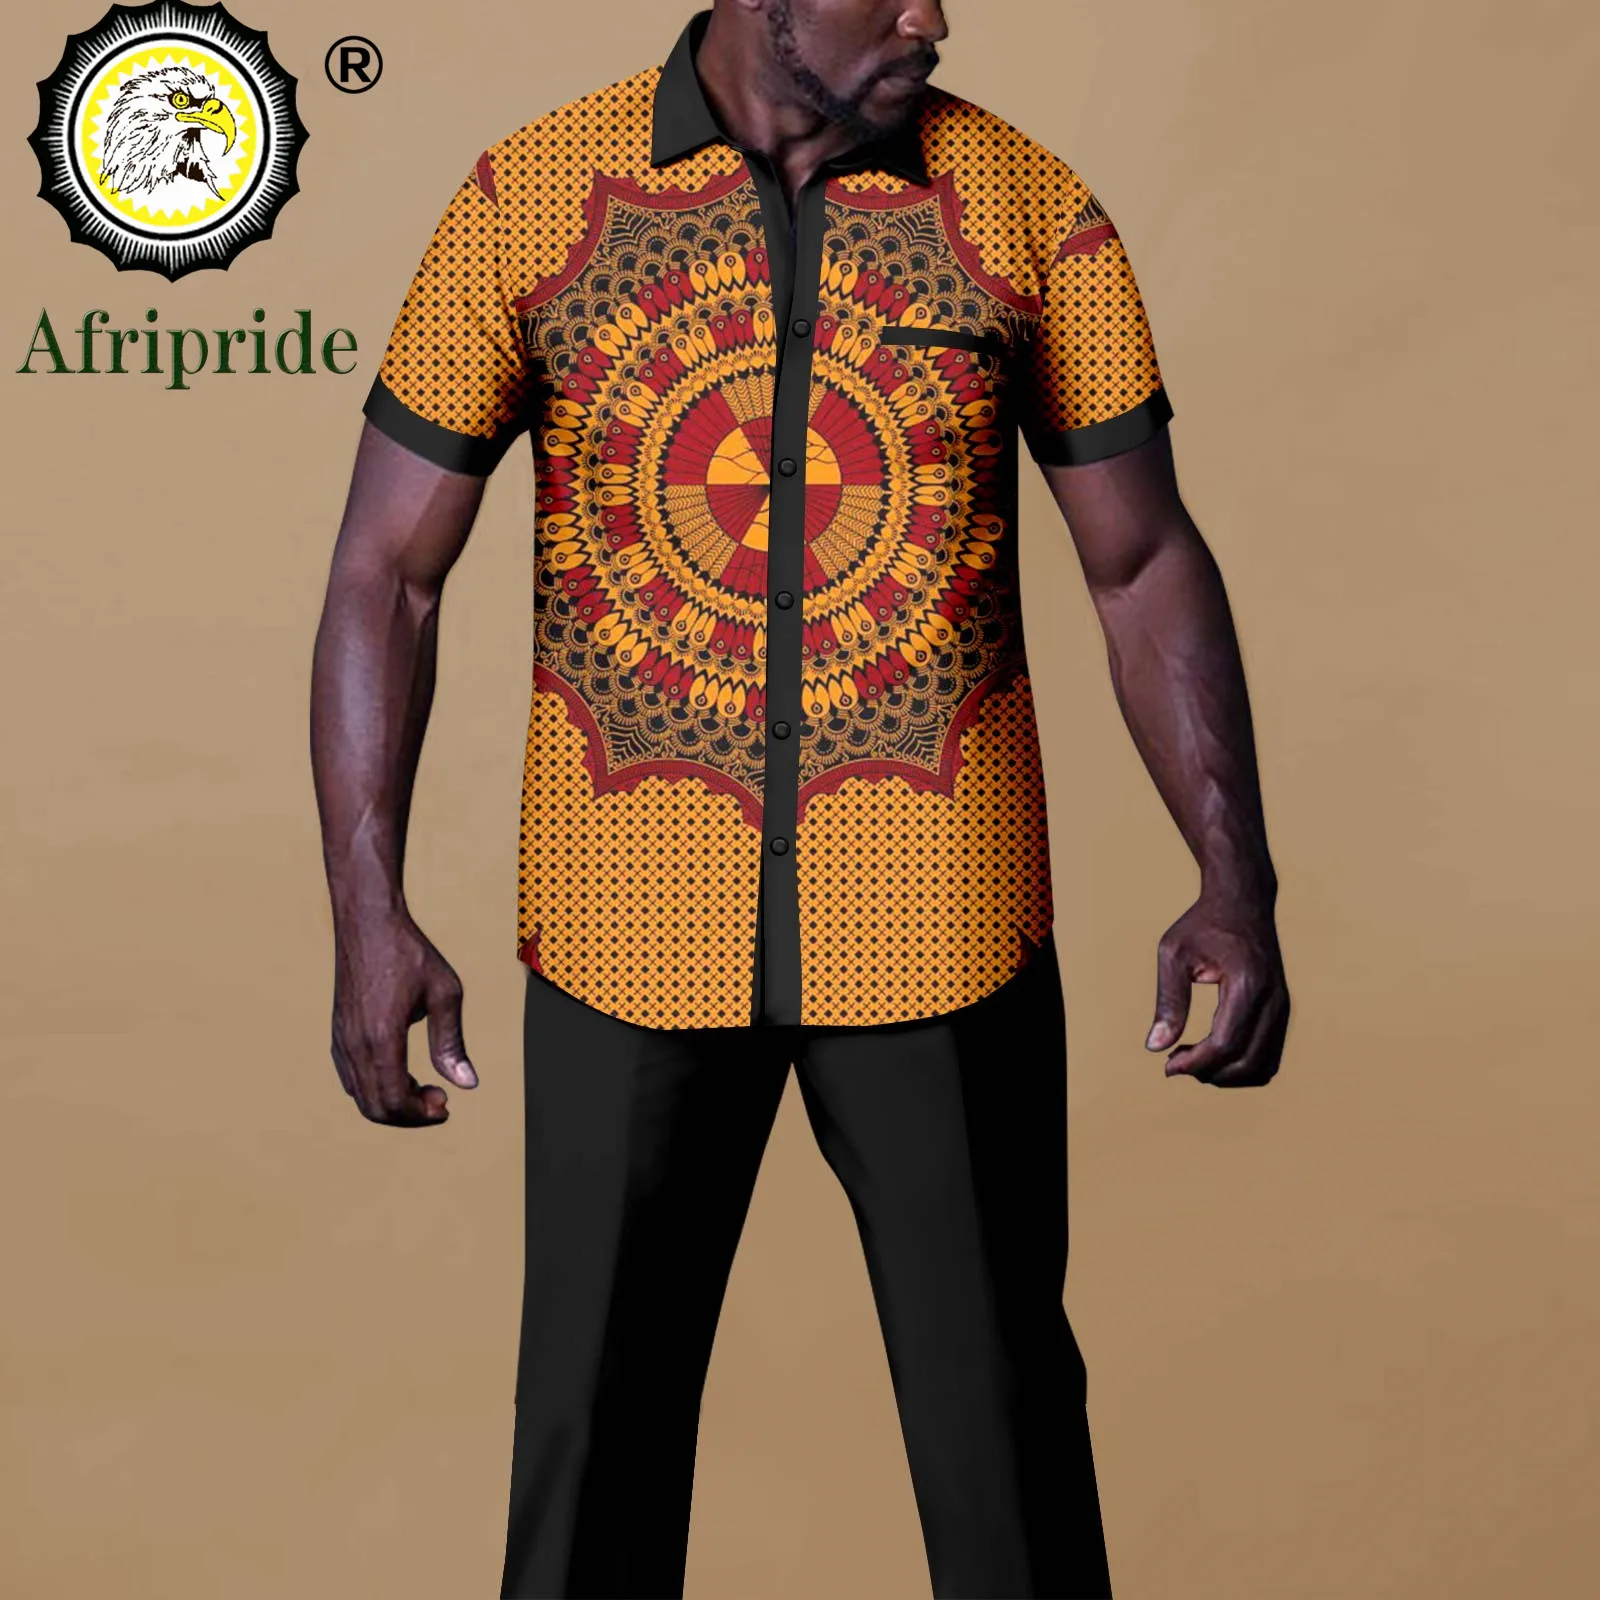 african suits for men embroidery short sleeve shirts and pants 2 piece set plus size casual tracksuit dashiki attire a2216134 African Outfits for Men Tracksuit Short Sleeve Print Shirts and Pants Set Dashiki Outfits Plus Size Casual Sweatsuits A2216089